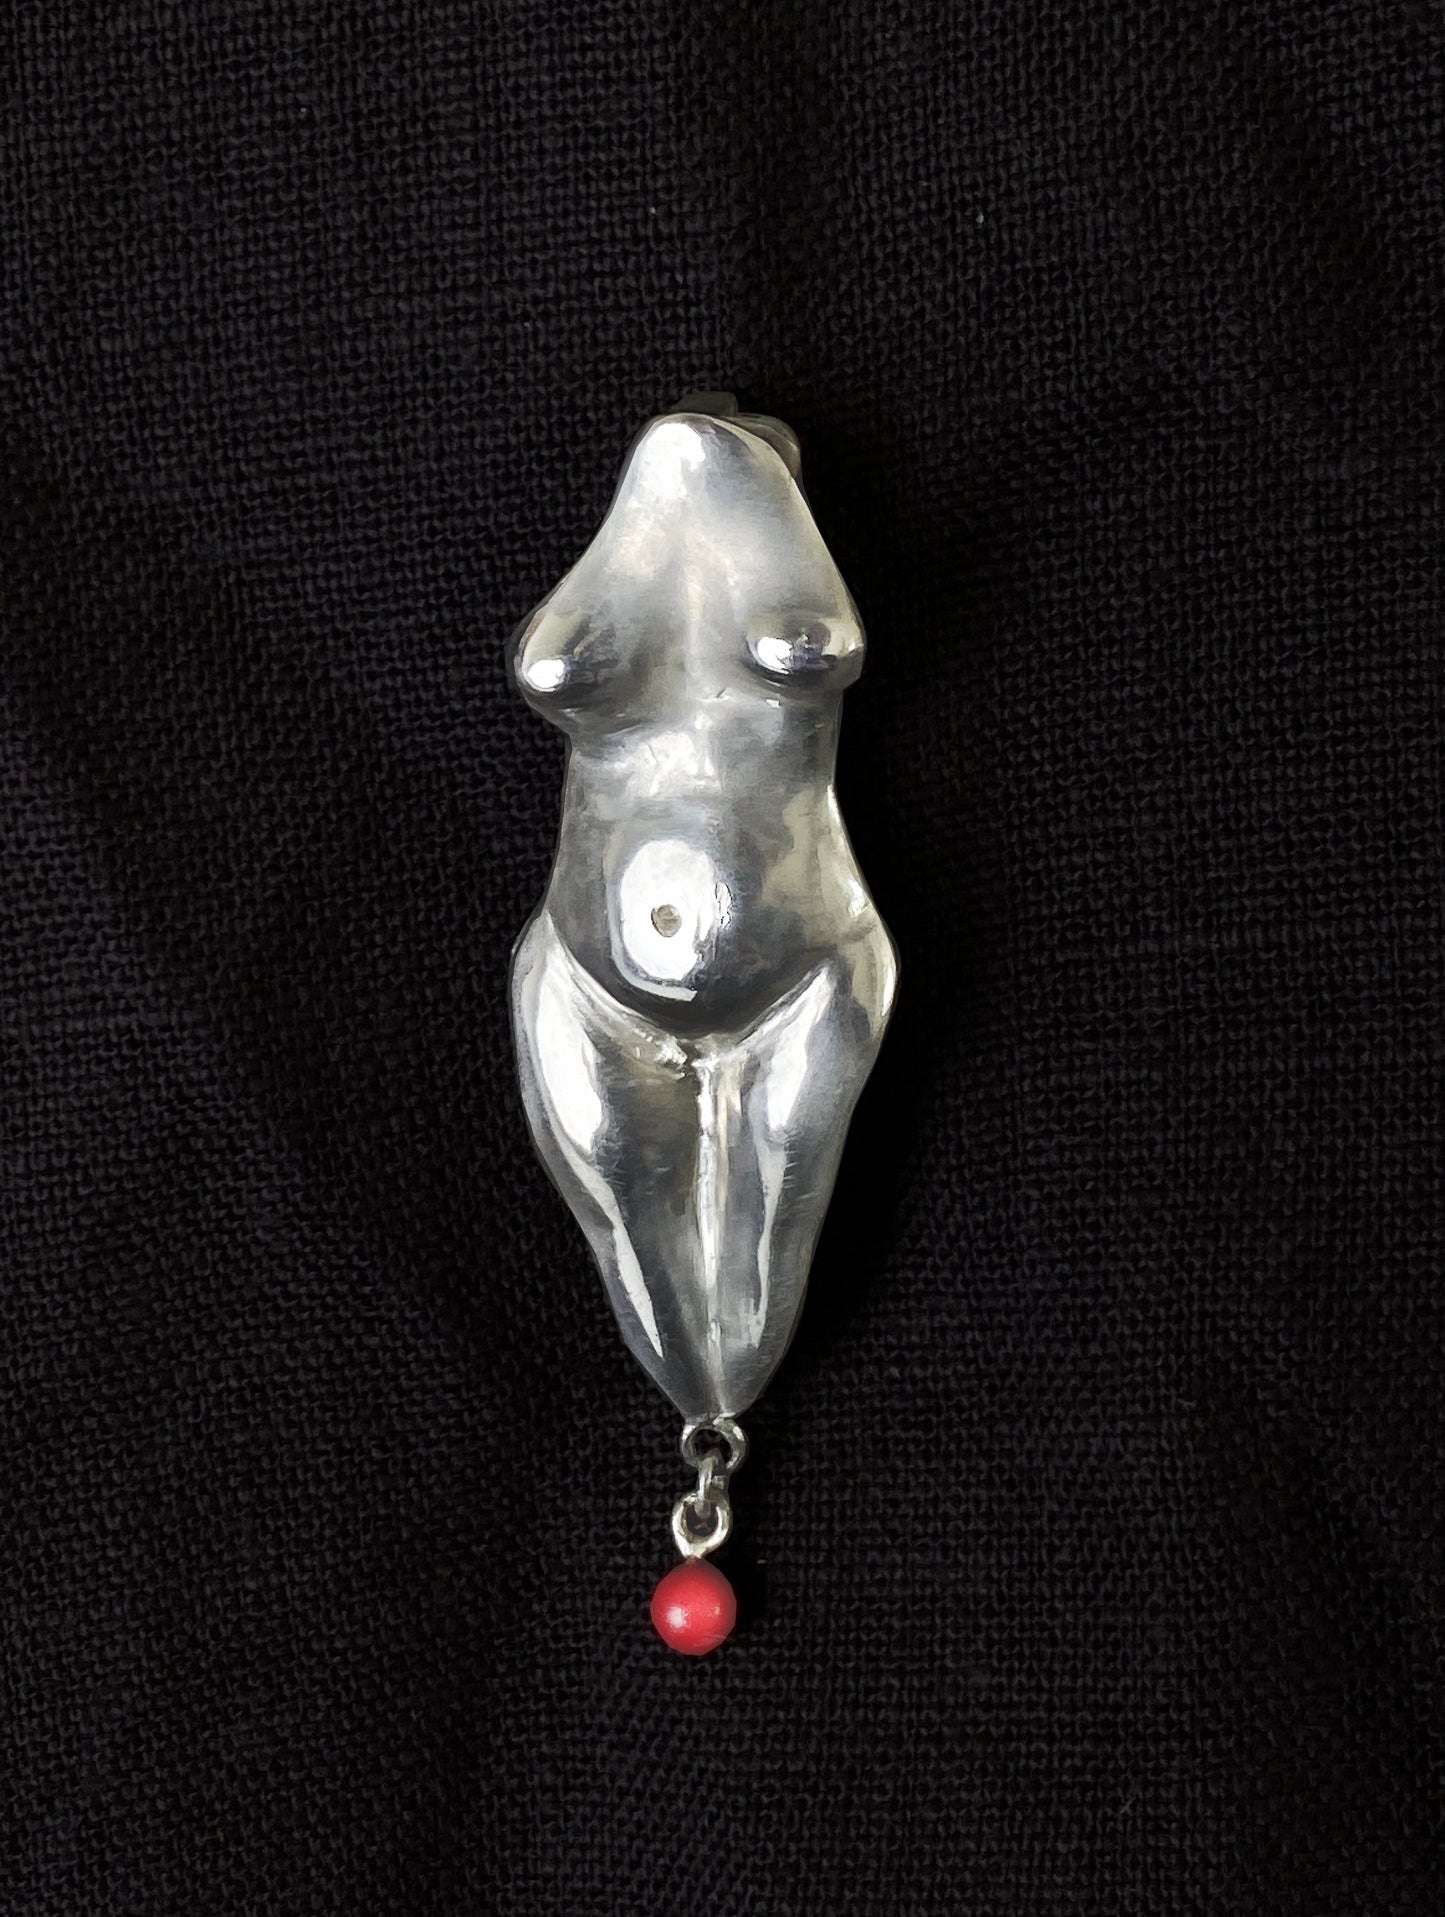 Goddess with red bead